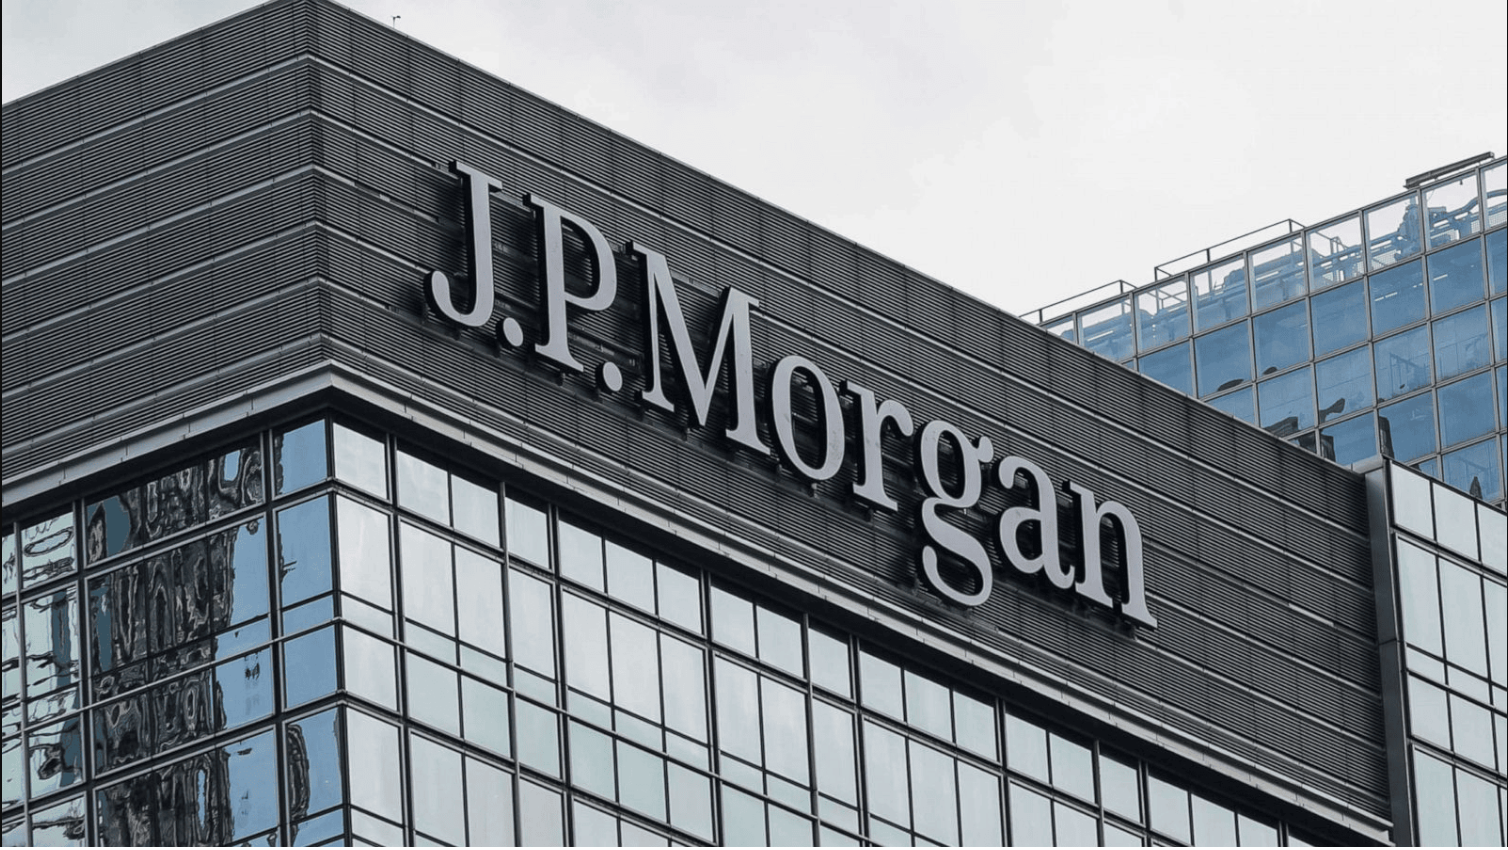 Nigeria’s FX reserve lower than CBN’s reported figures—JP Morgan